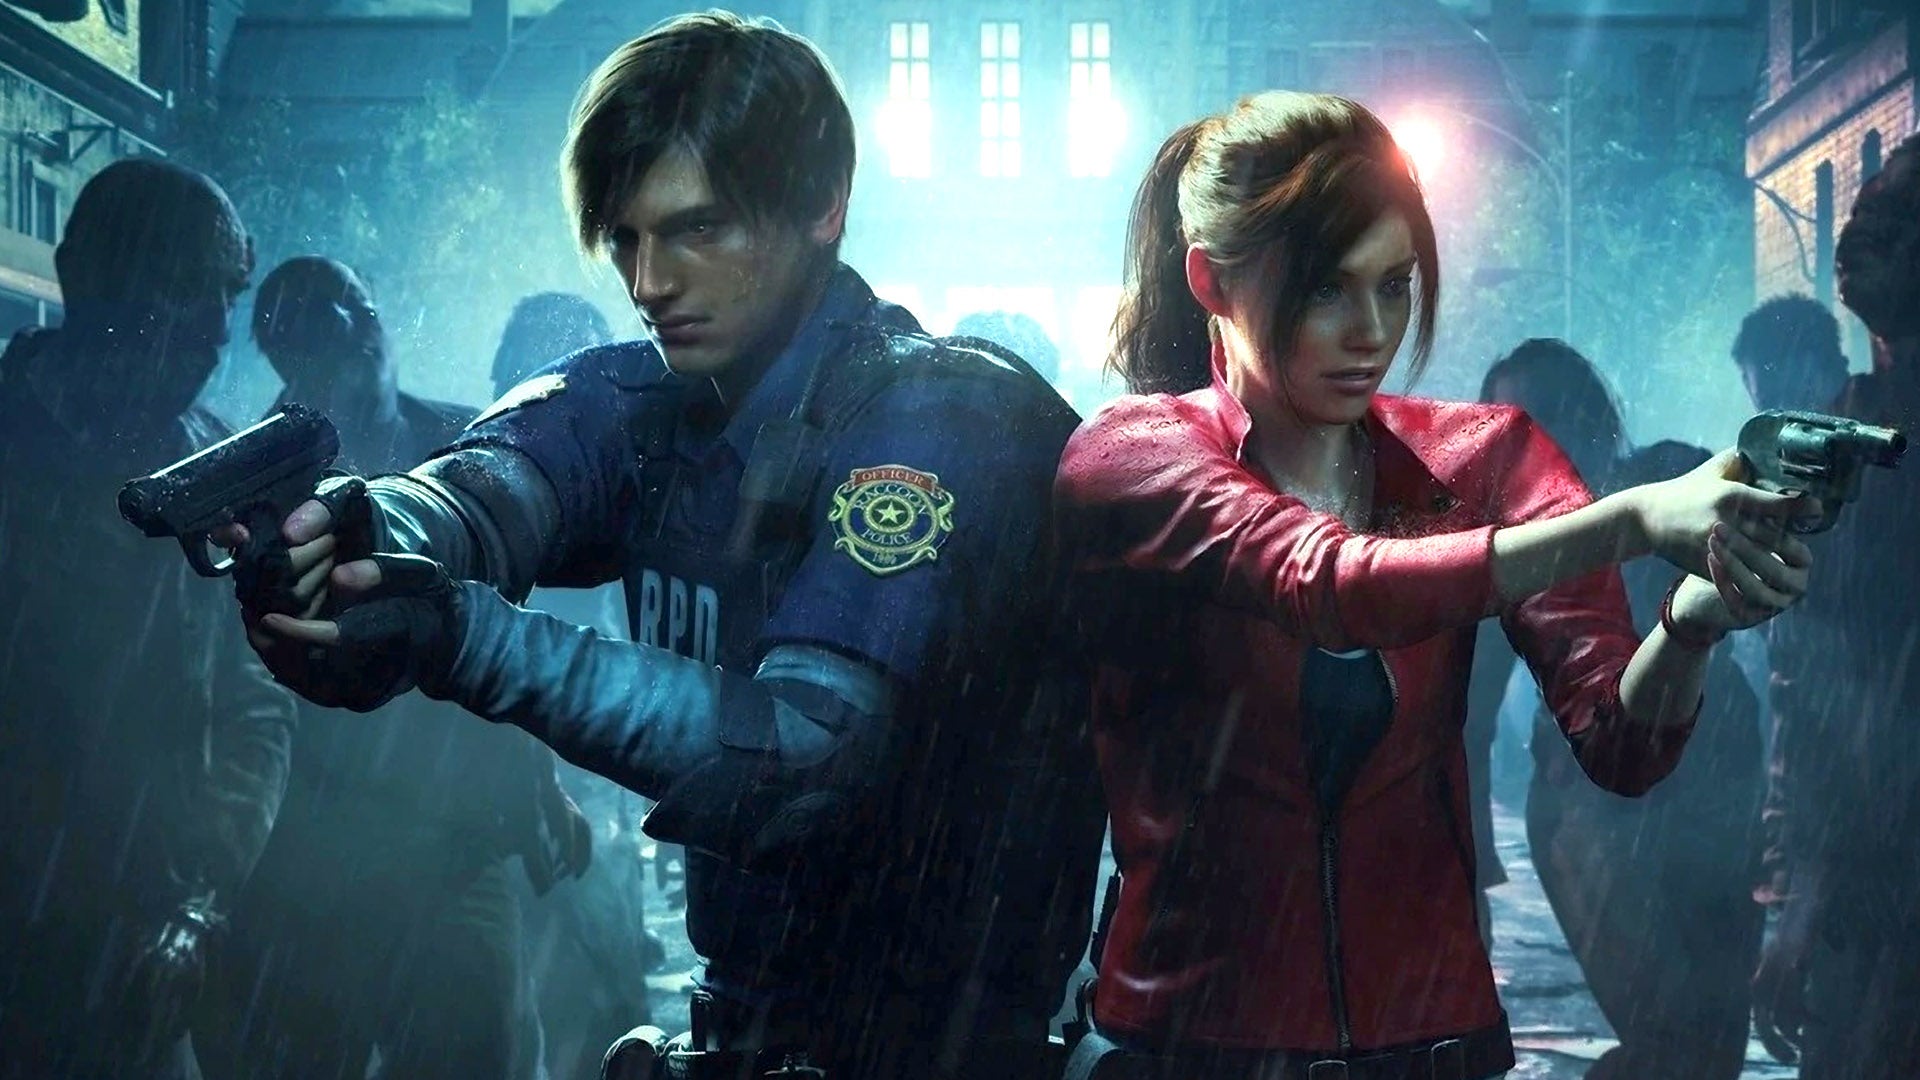 Image for PS5/ Xbox Series X/S - Resident Evil 2 Remake/ Resident Evil 3 Remake - Current-Gen Patch Review